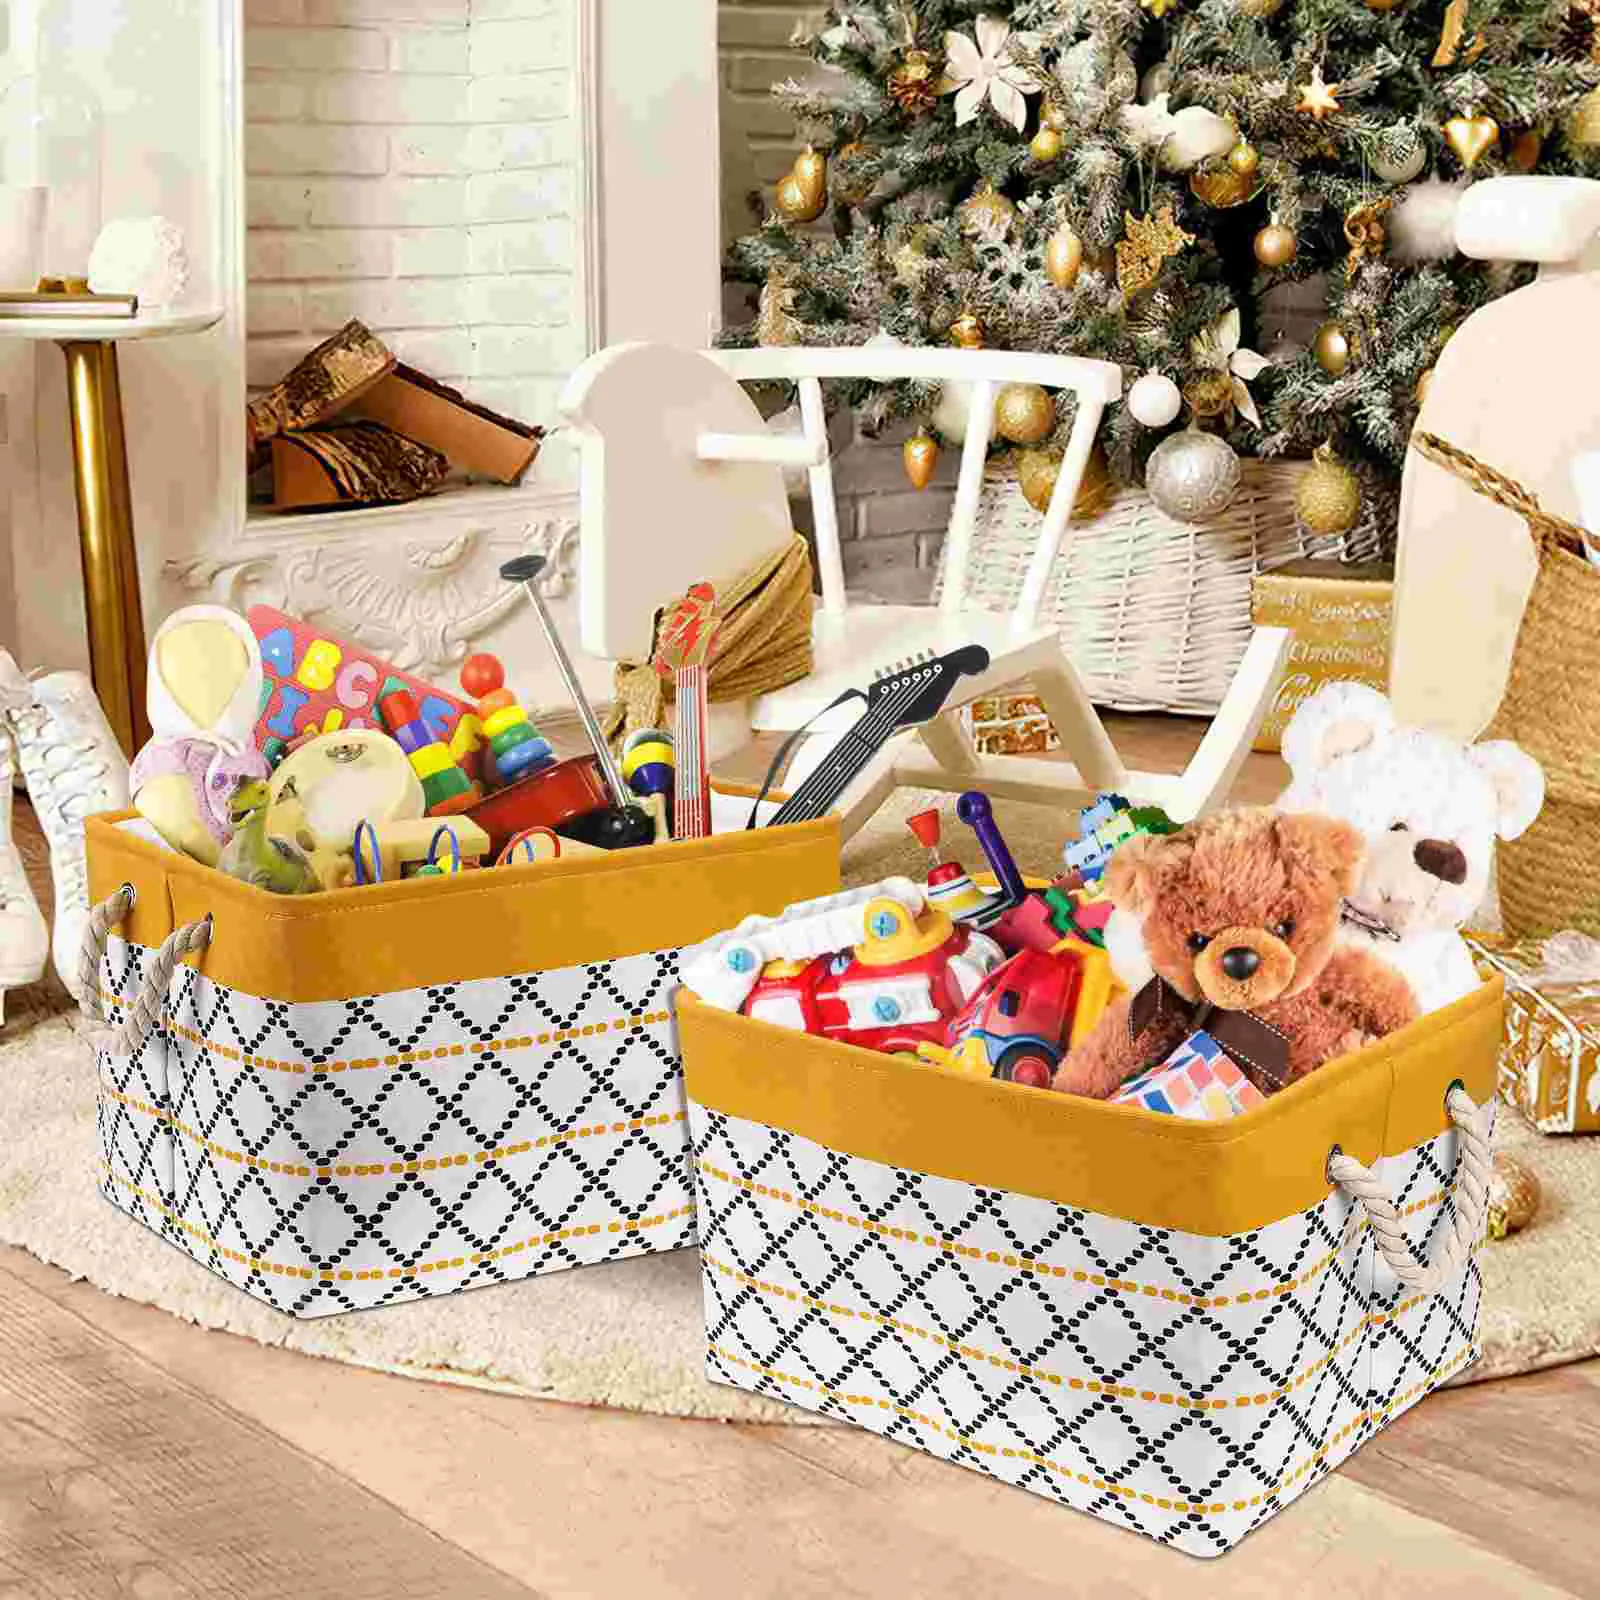 

Sundries Containers Storage Holders Baskets Laundry Oxford Cloth Home Toys Dirty Clothing Organizers Foldable